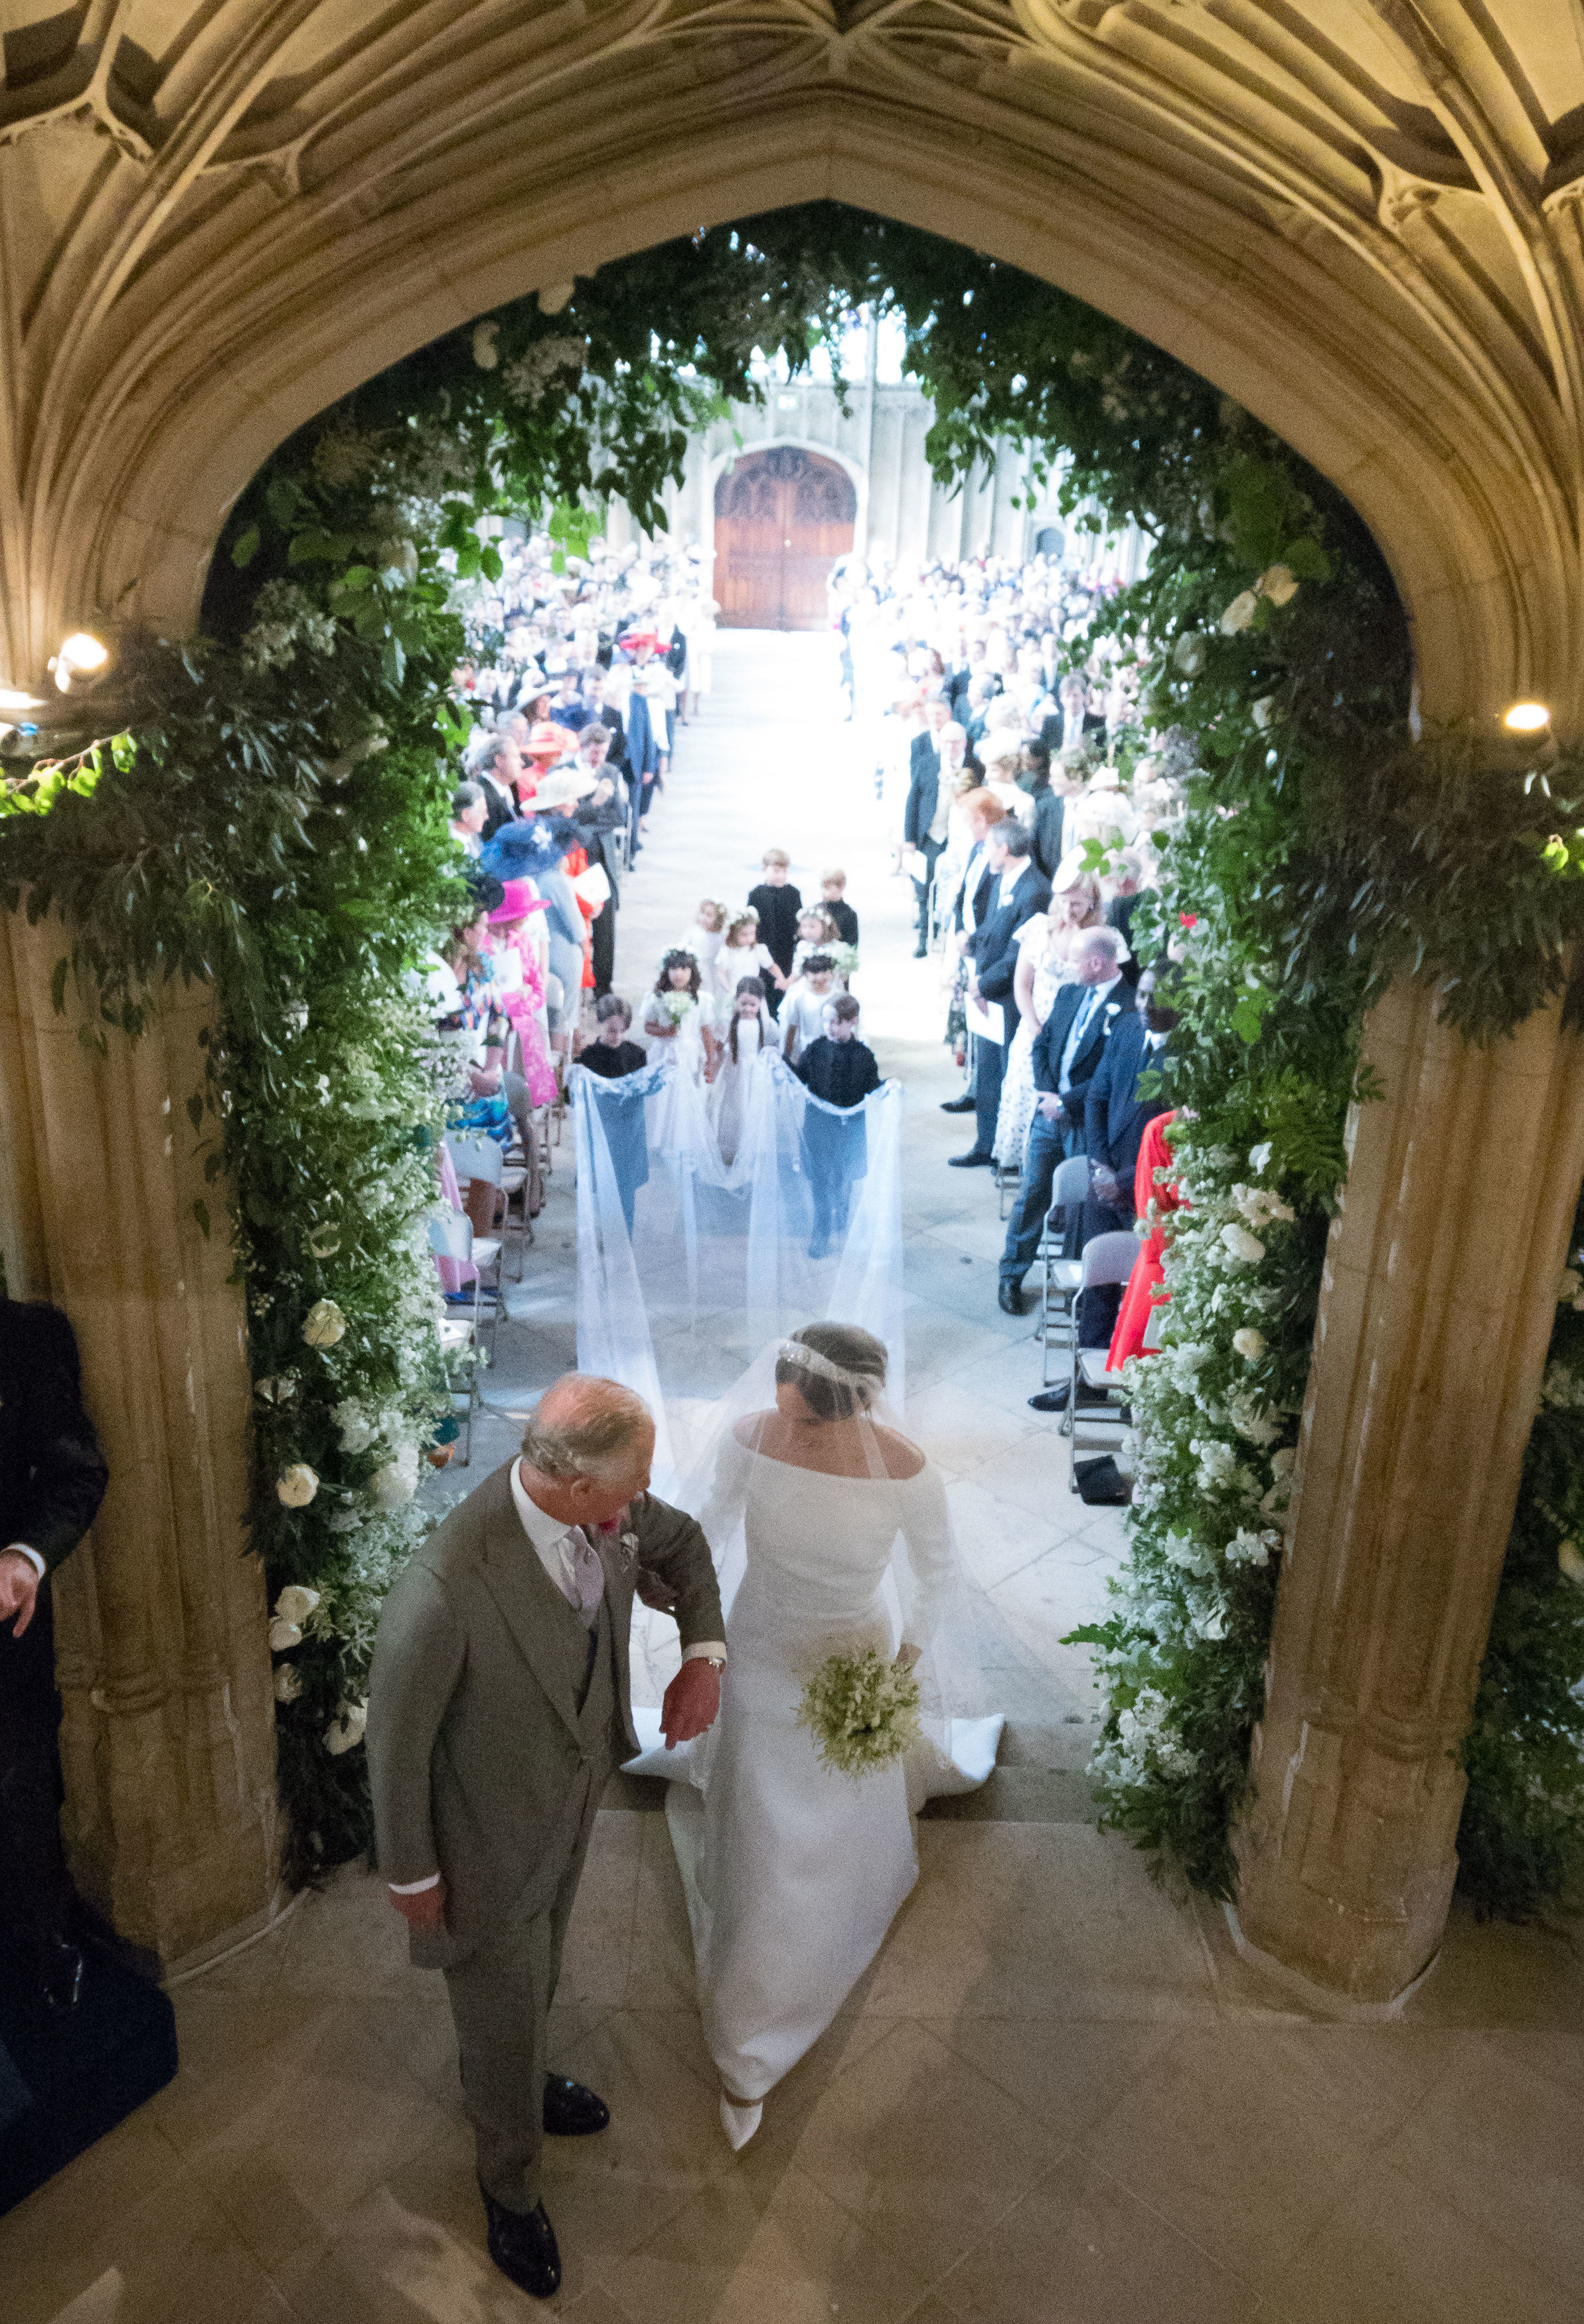 Meghan Markle walks up the aisle with the then-Prince Charles on May 19, 2018 in Windsor, England | Source: Getty Images